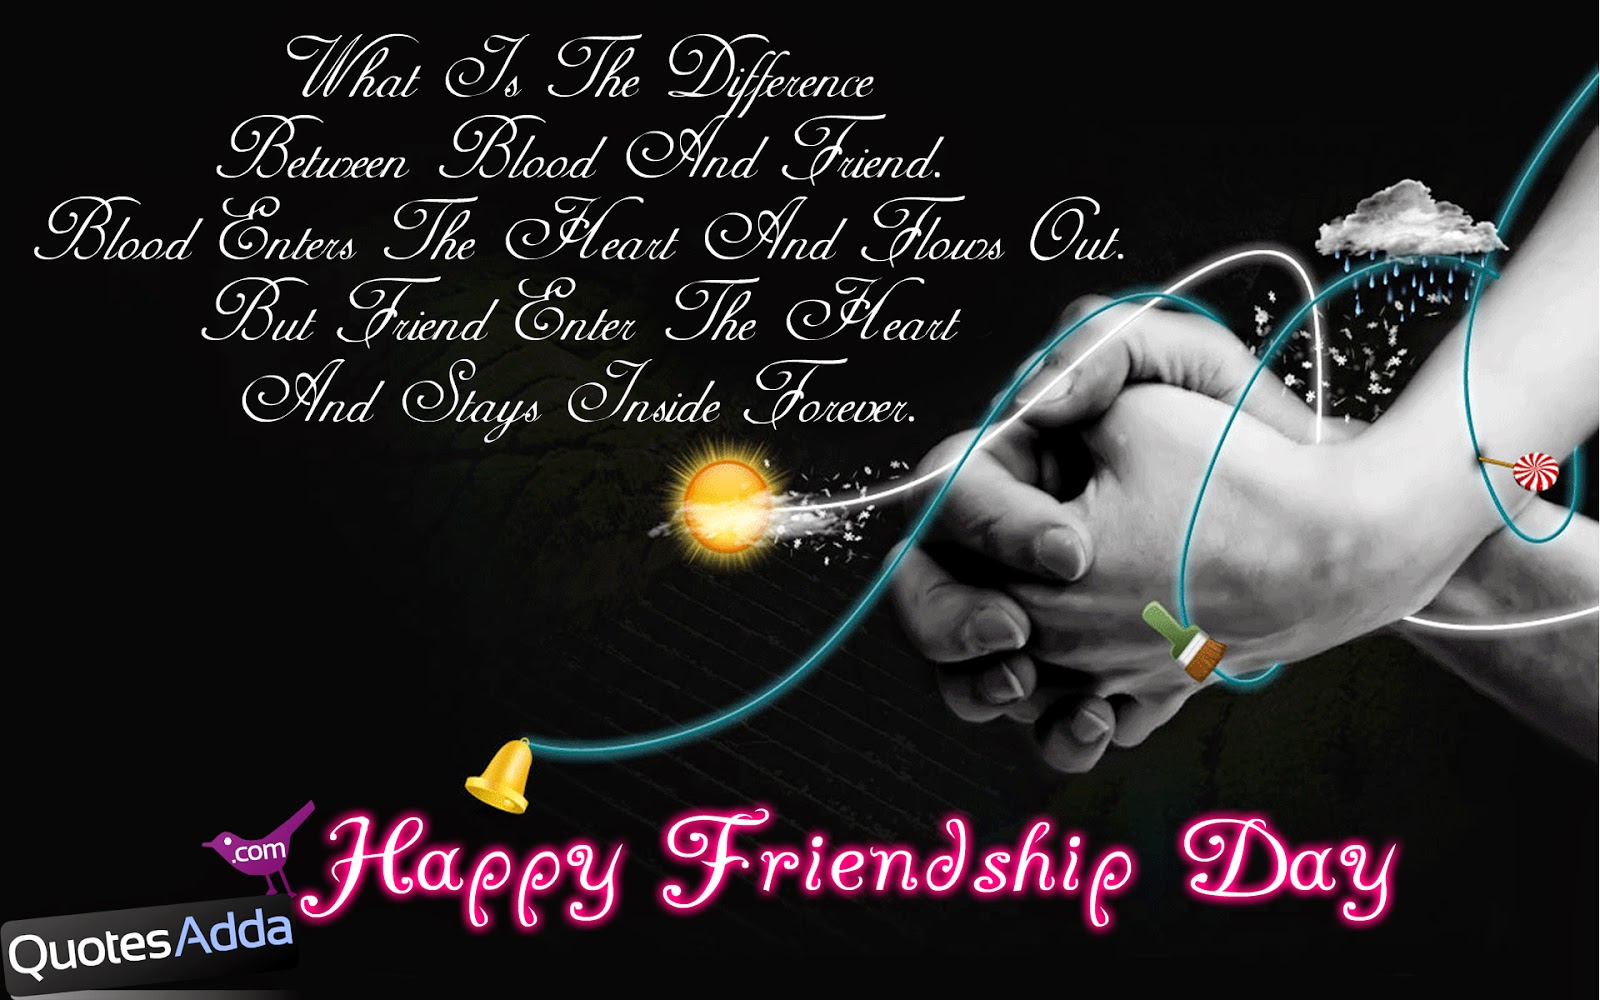 Happy Friendship Day Quotes and Greetings in English | QuotesAdda.com